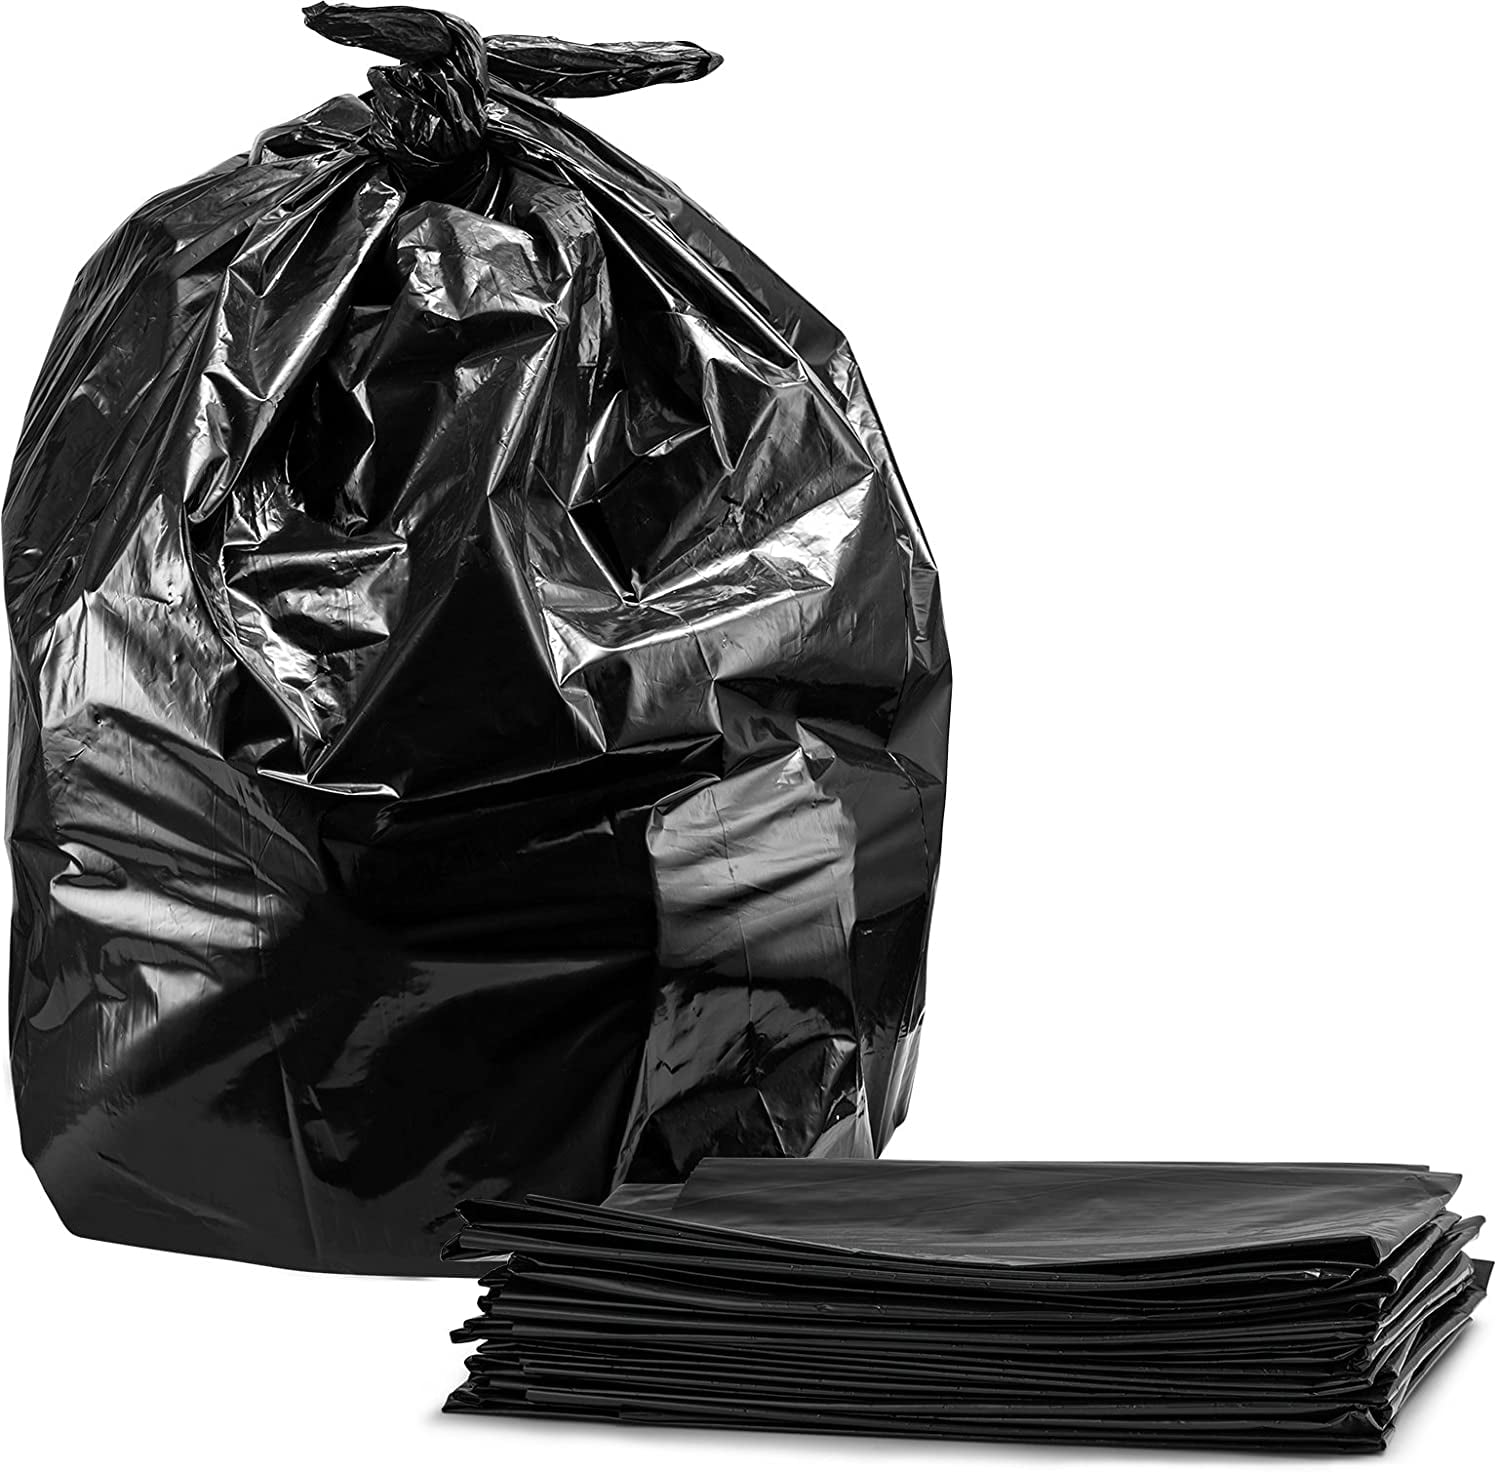 Trash Bags, (100 Count) Large Black Heavy Duty Garbage Bags